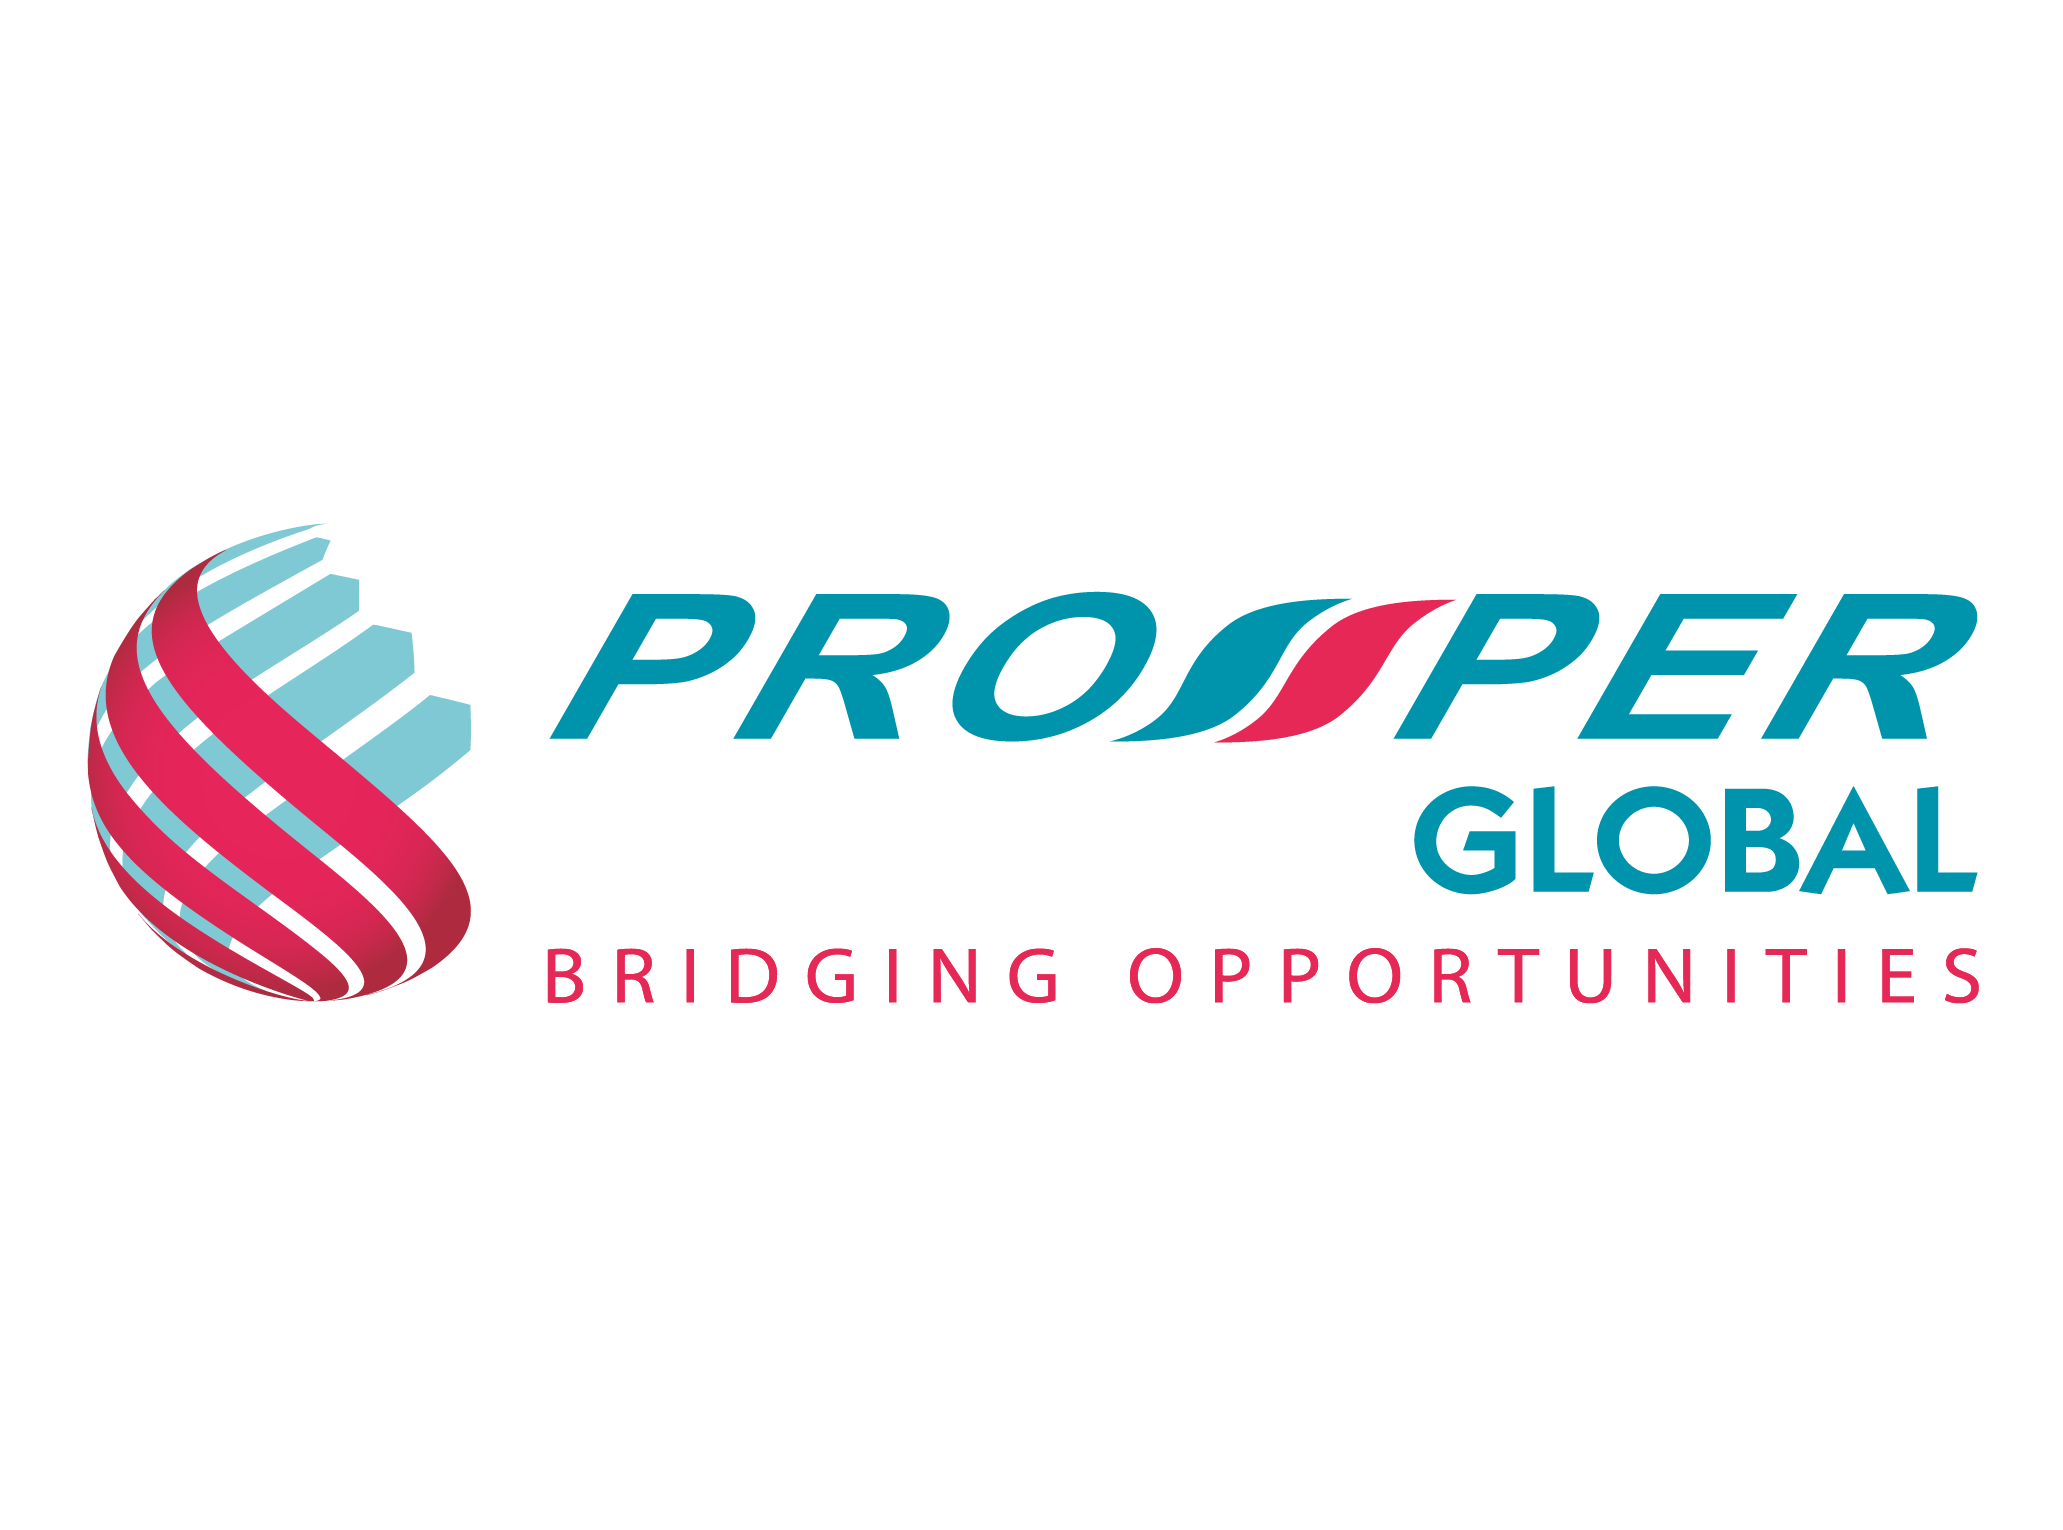 PROSPER Global - An initiative to assist bumiputera entrepreneurs to improve and elevate their businesses to be more competitive.